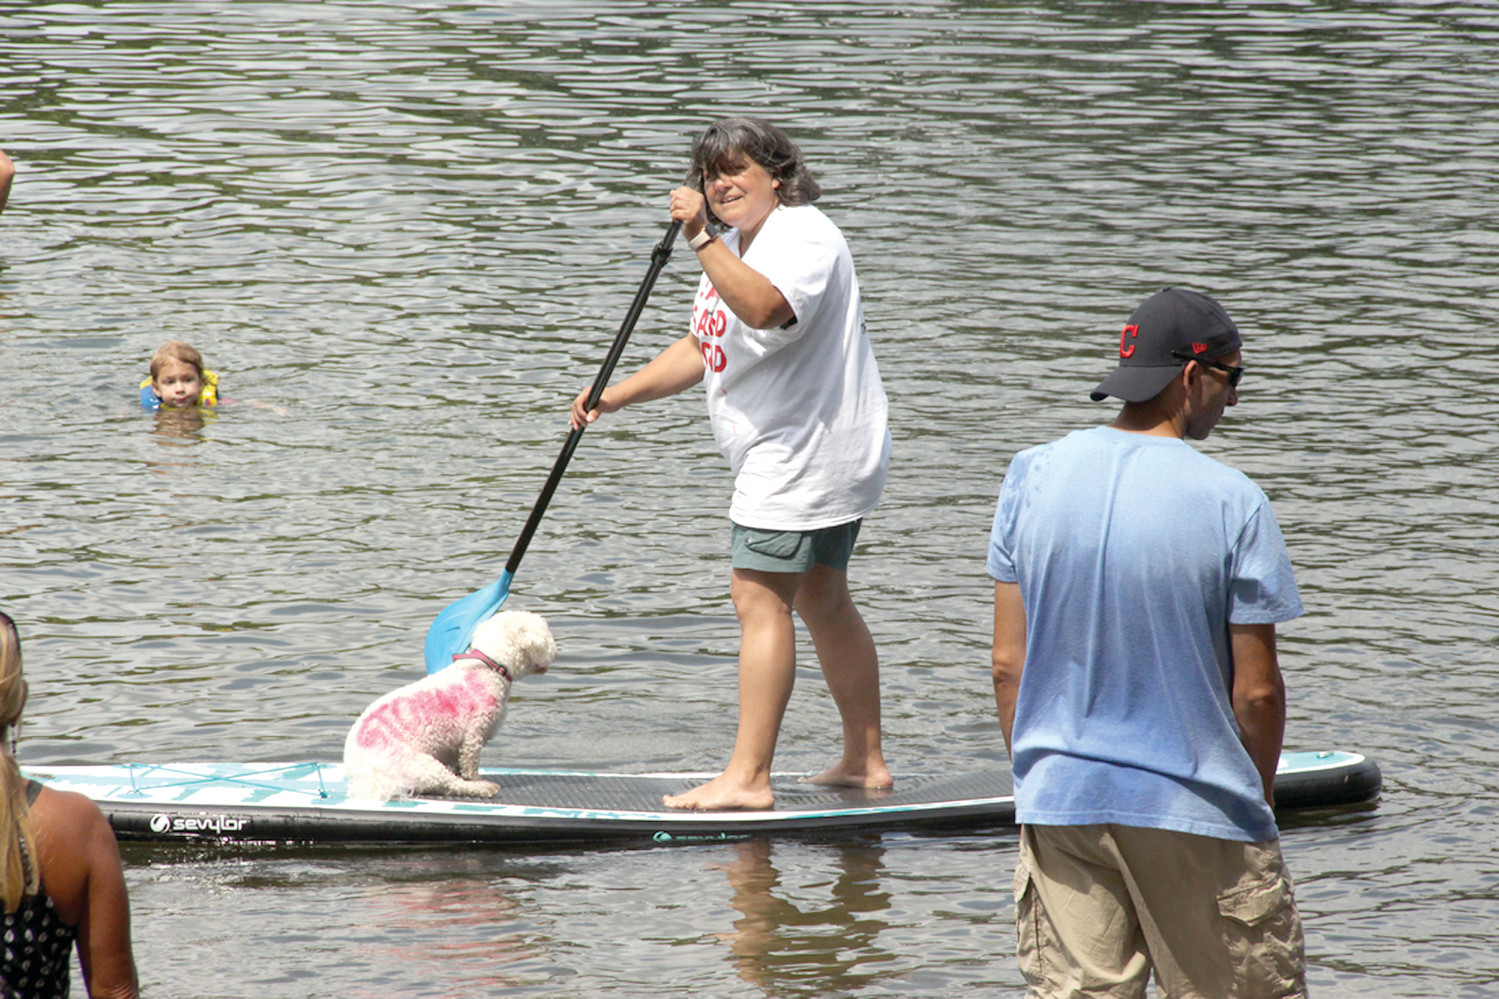 ALL ABOARD: Pond neighbor Alisa Richardson not only had her dog along for the Palozza, but it was also expressing the aim to save the pond.